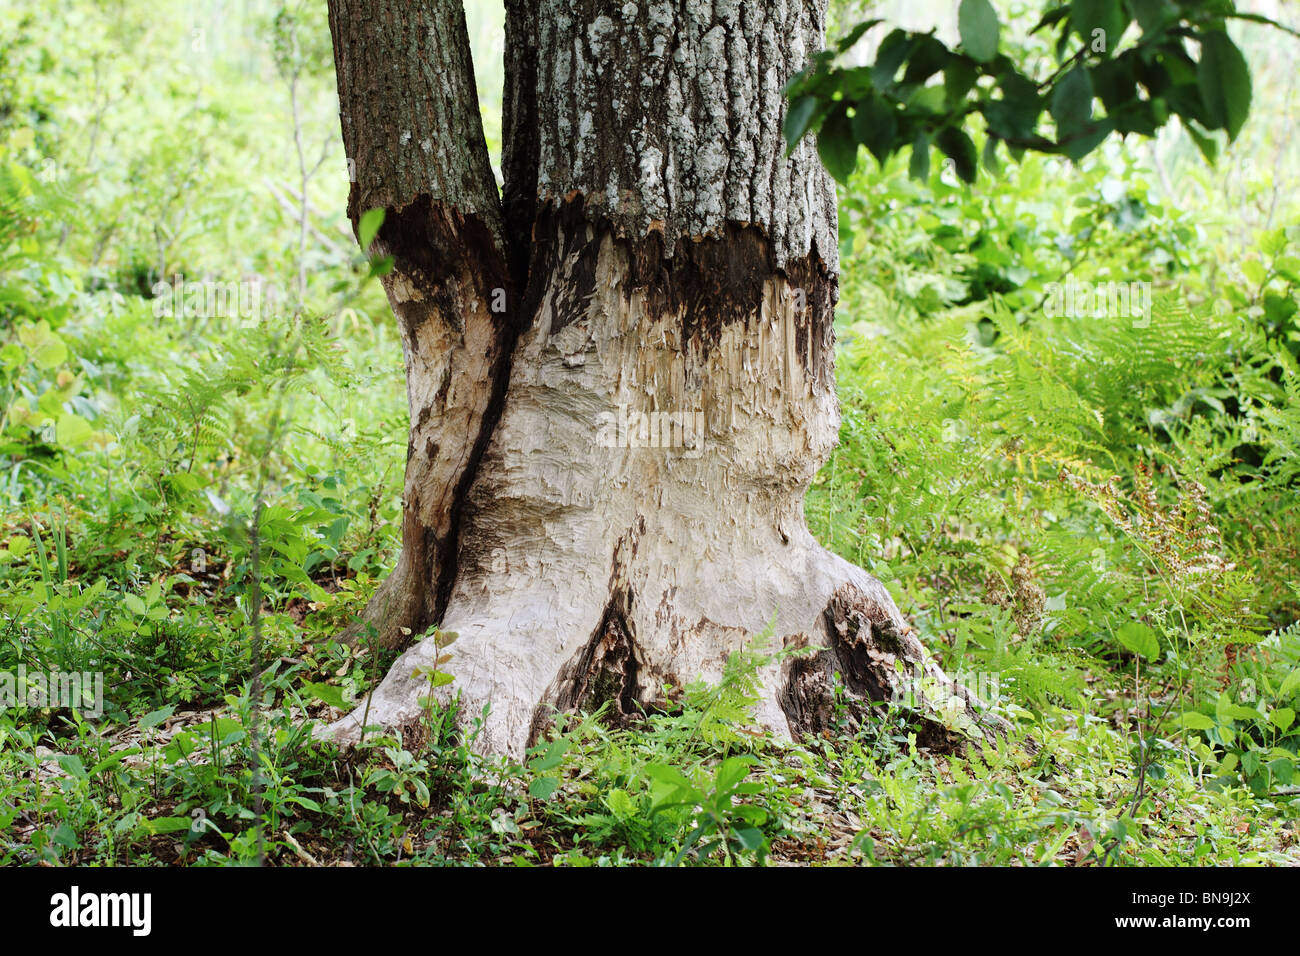 Beaver gnawing on a tree Stock Photo